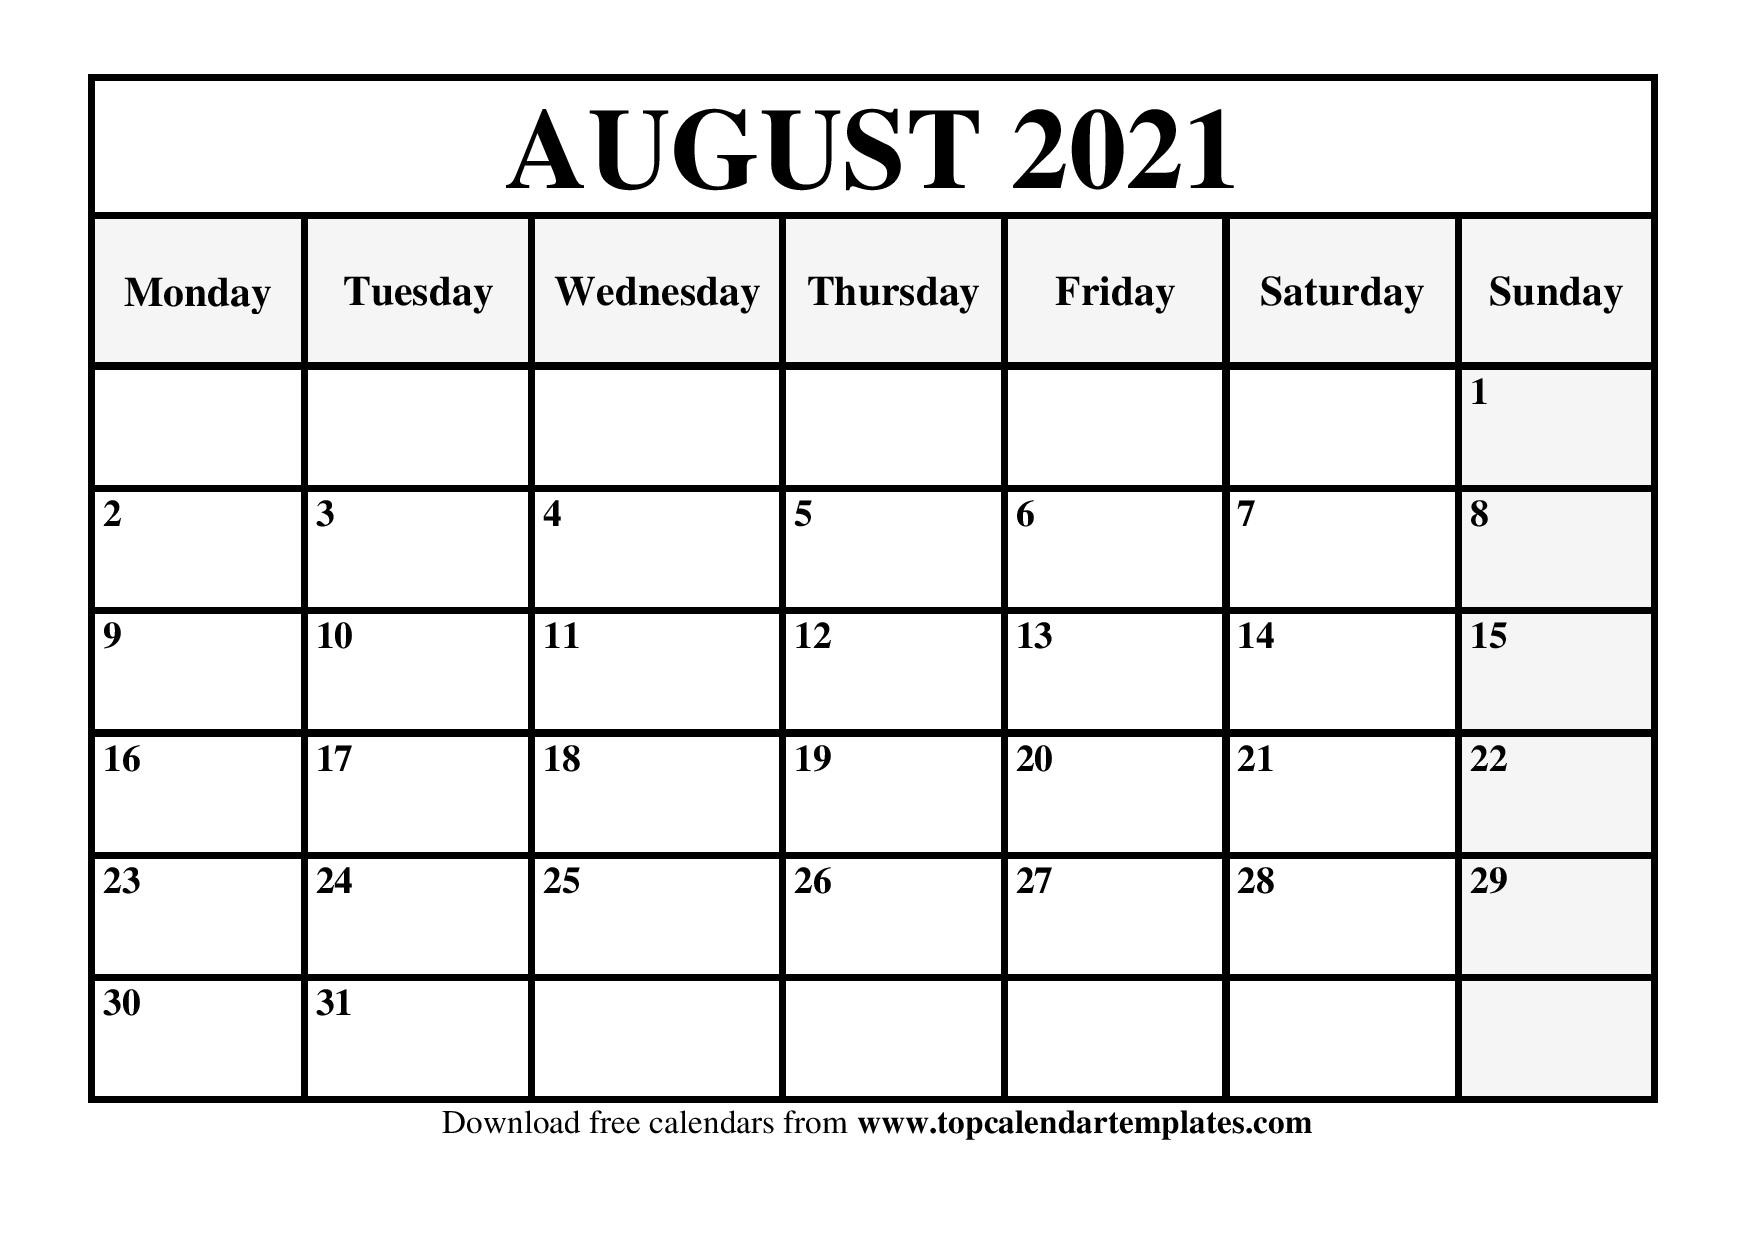 August 2021 Printable Calendar - Monthly Templates-Free Printable Calendars 2021 Monthly With Bills